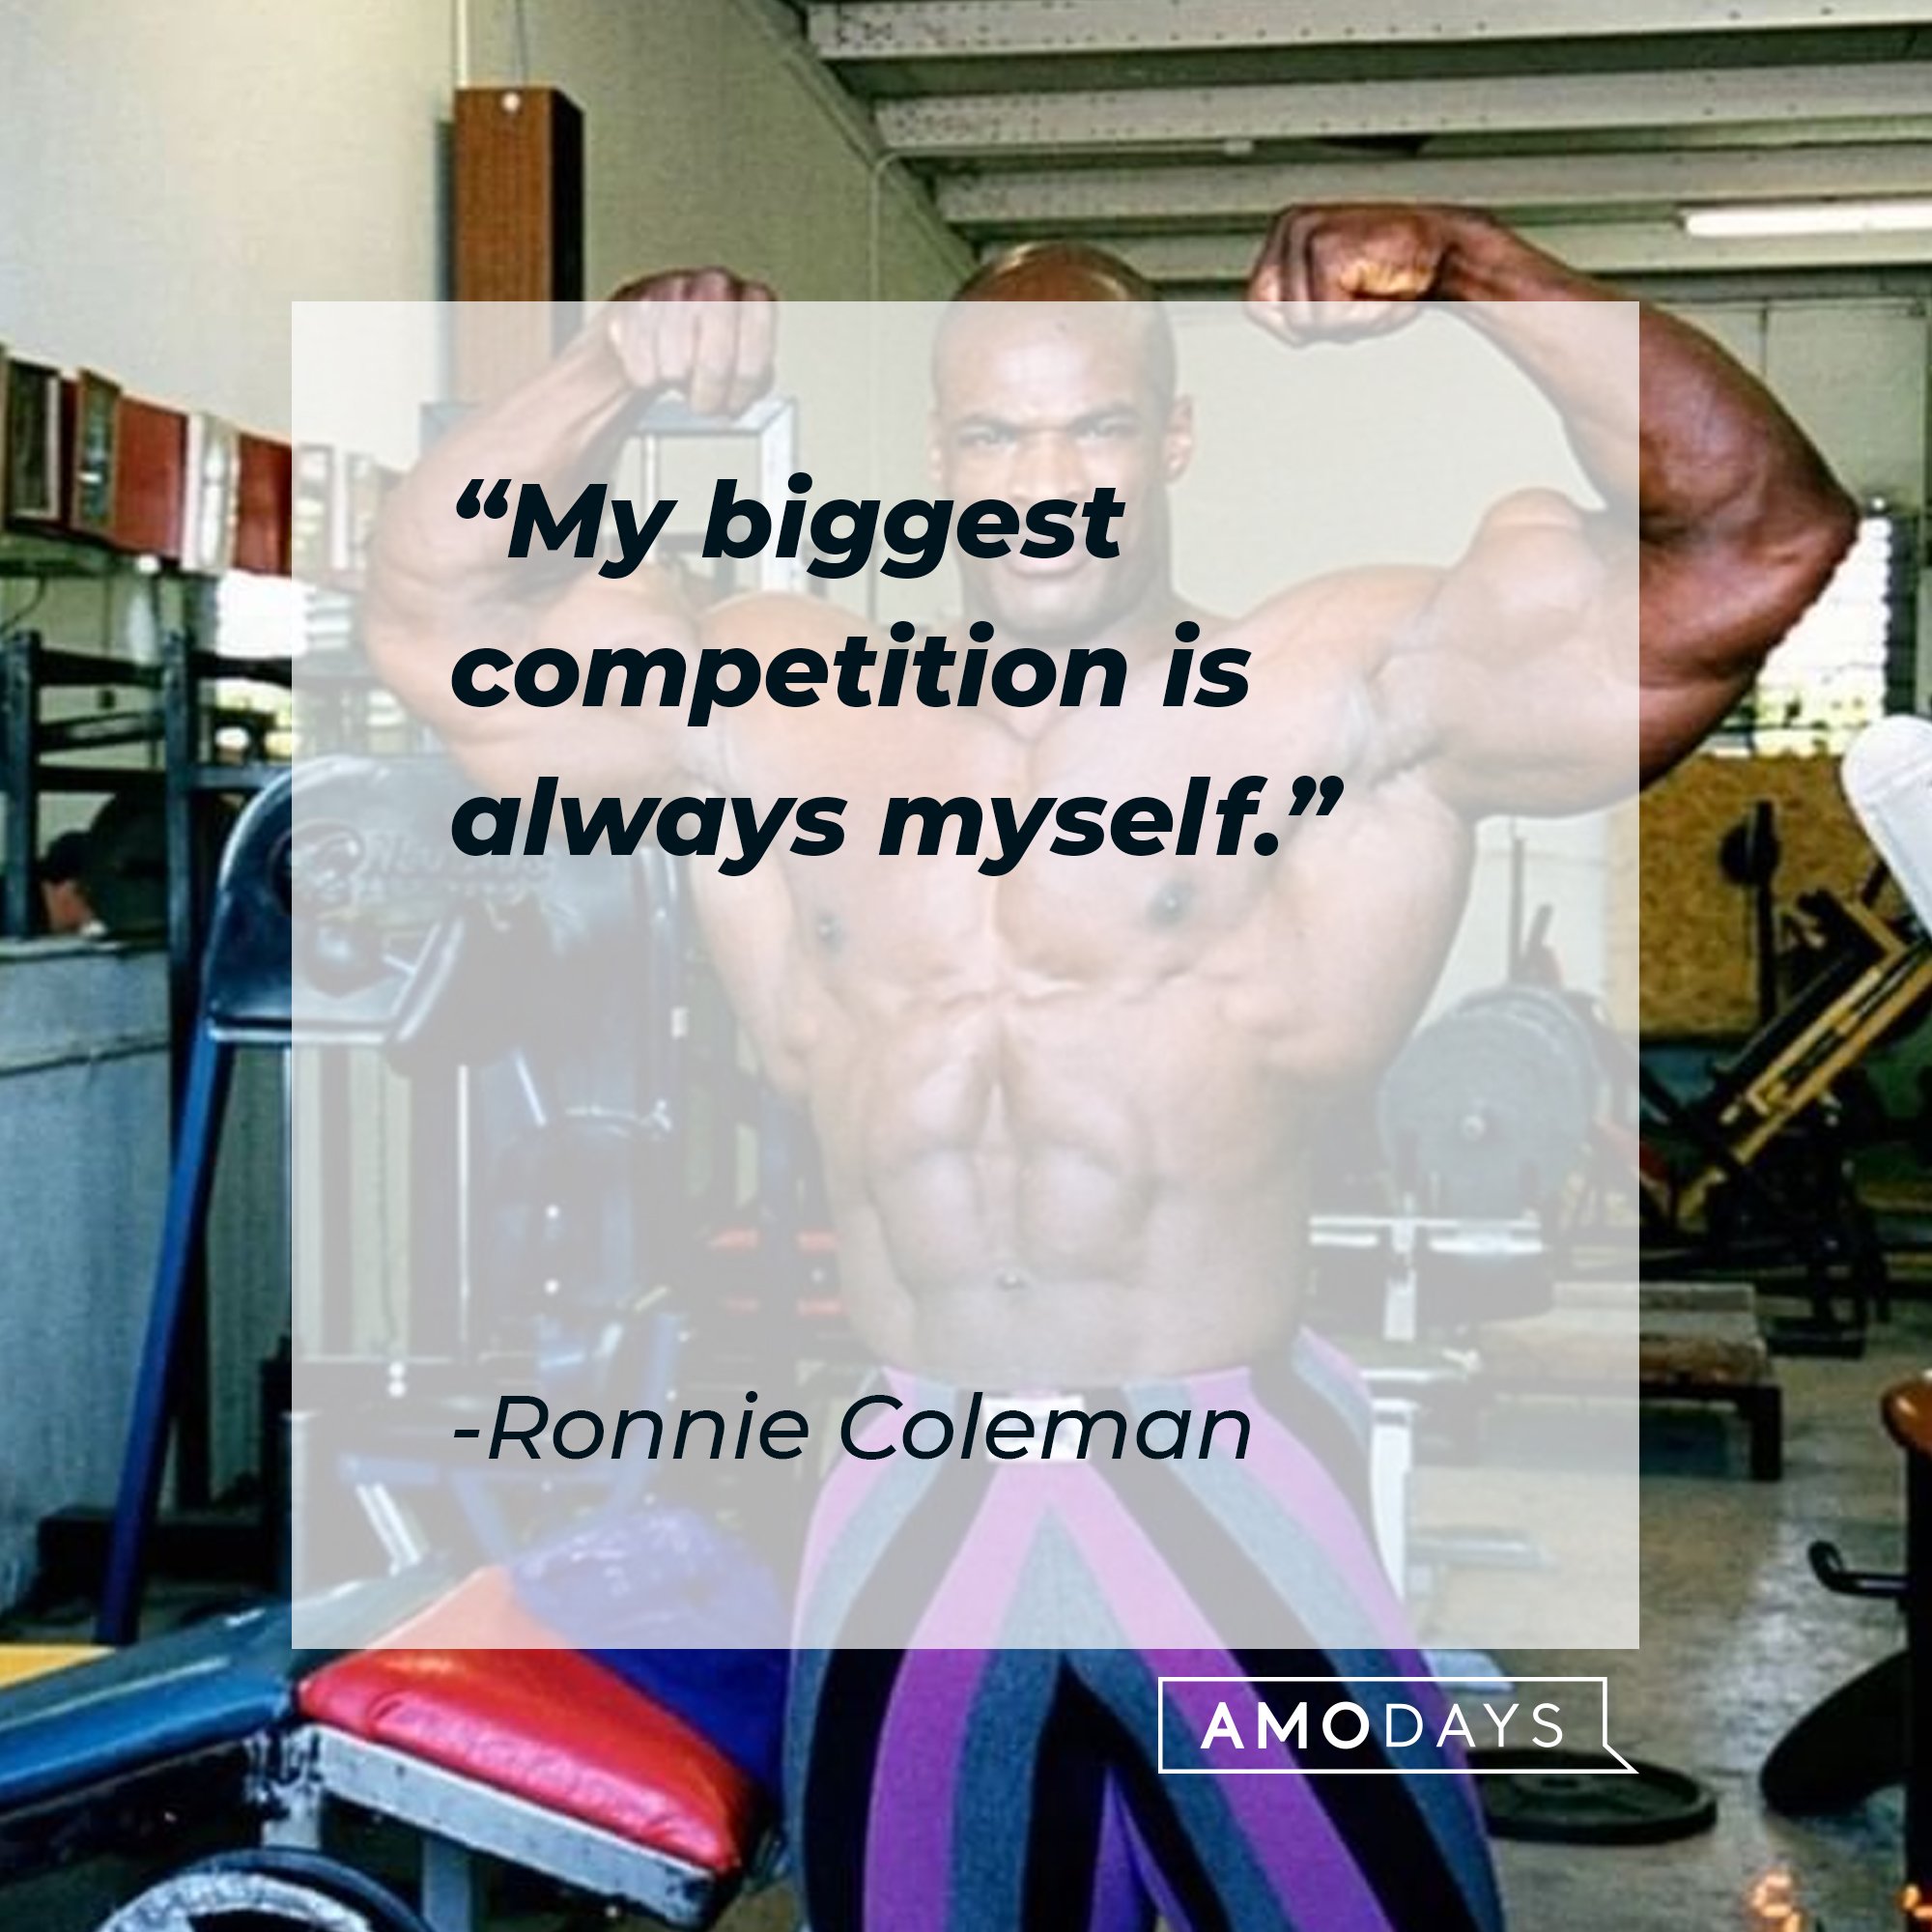 Ronnie Coleman’s quote: “My biggest competition is always myself. | Image: AmoDays